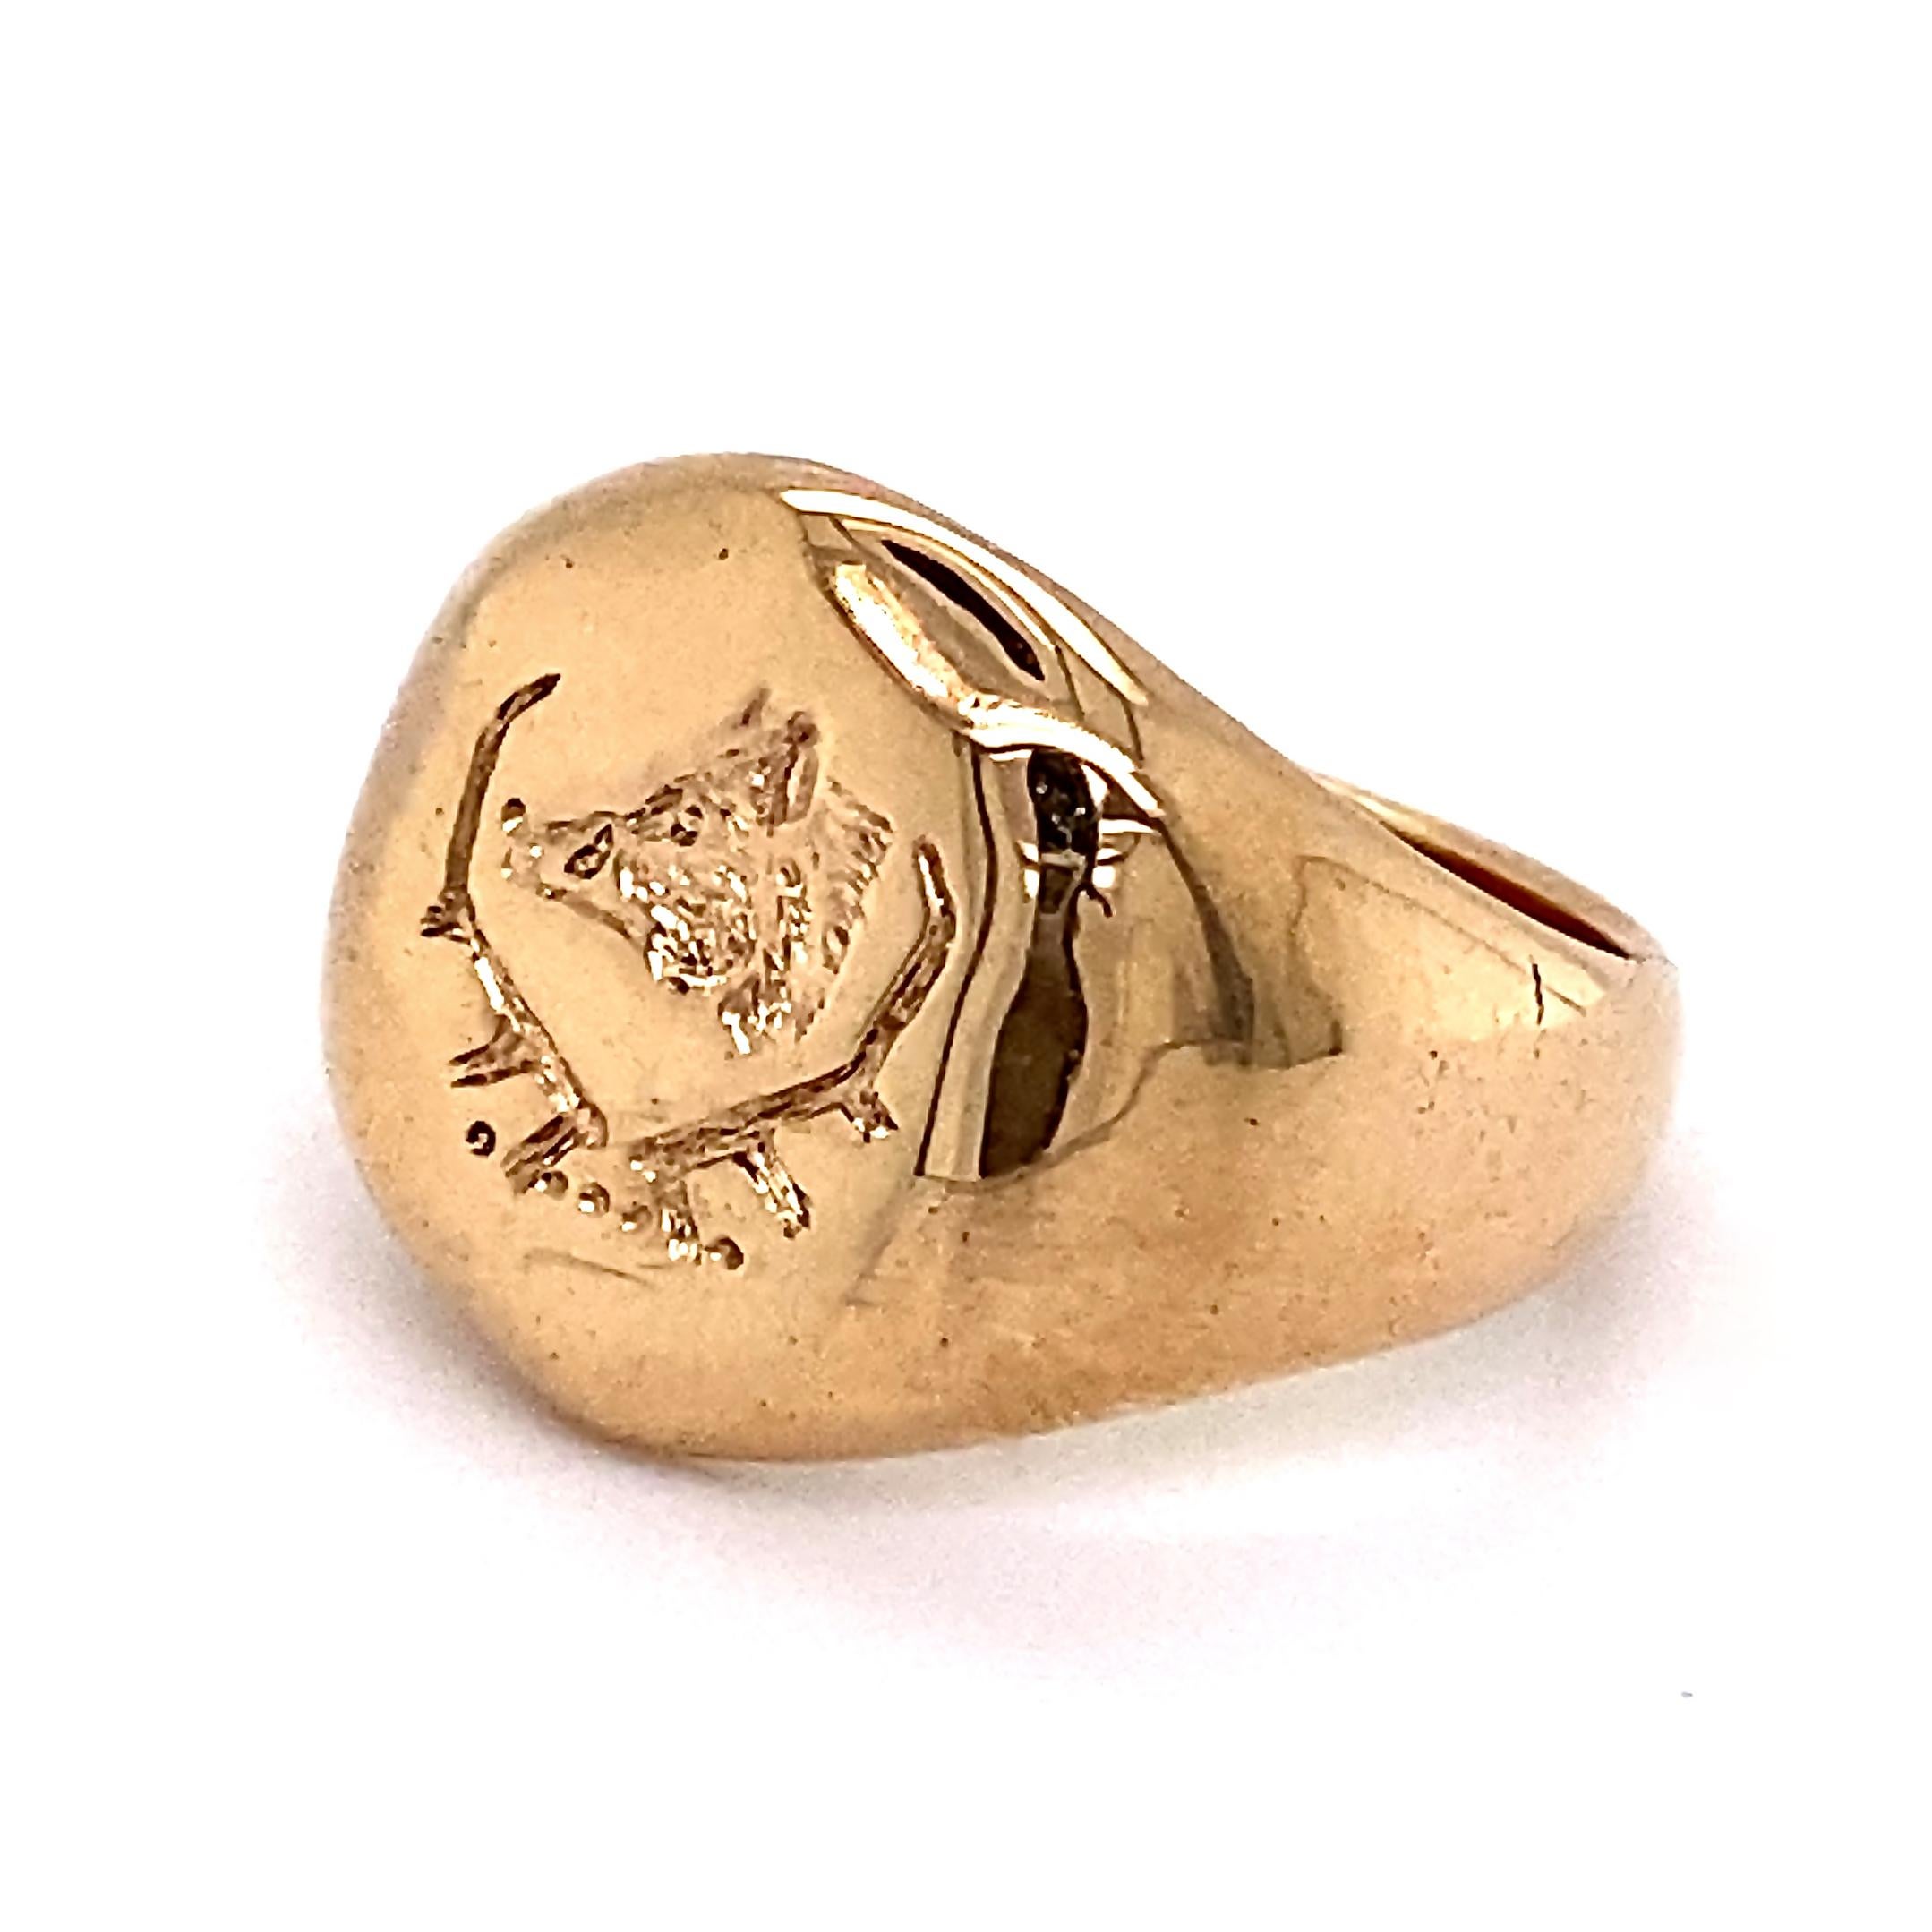 This appealing little ring features a couped snaggle-toothed boar's head in profile, facing left, surrounded by a pair of branches.  The design is devoid of quarters, partitions, mottos, mantles or any of the other heraldic doo-dads that make up a